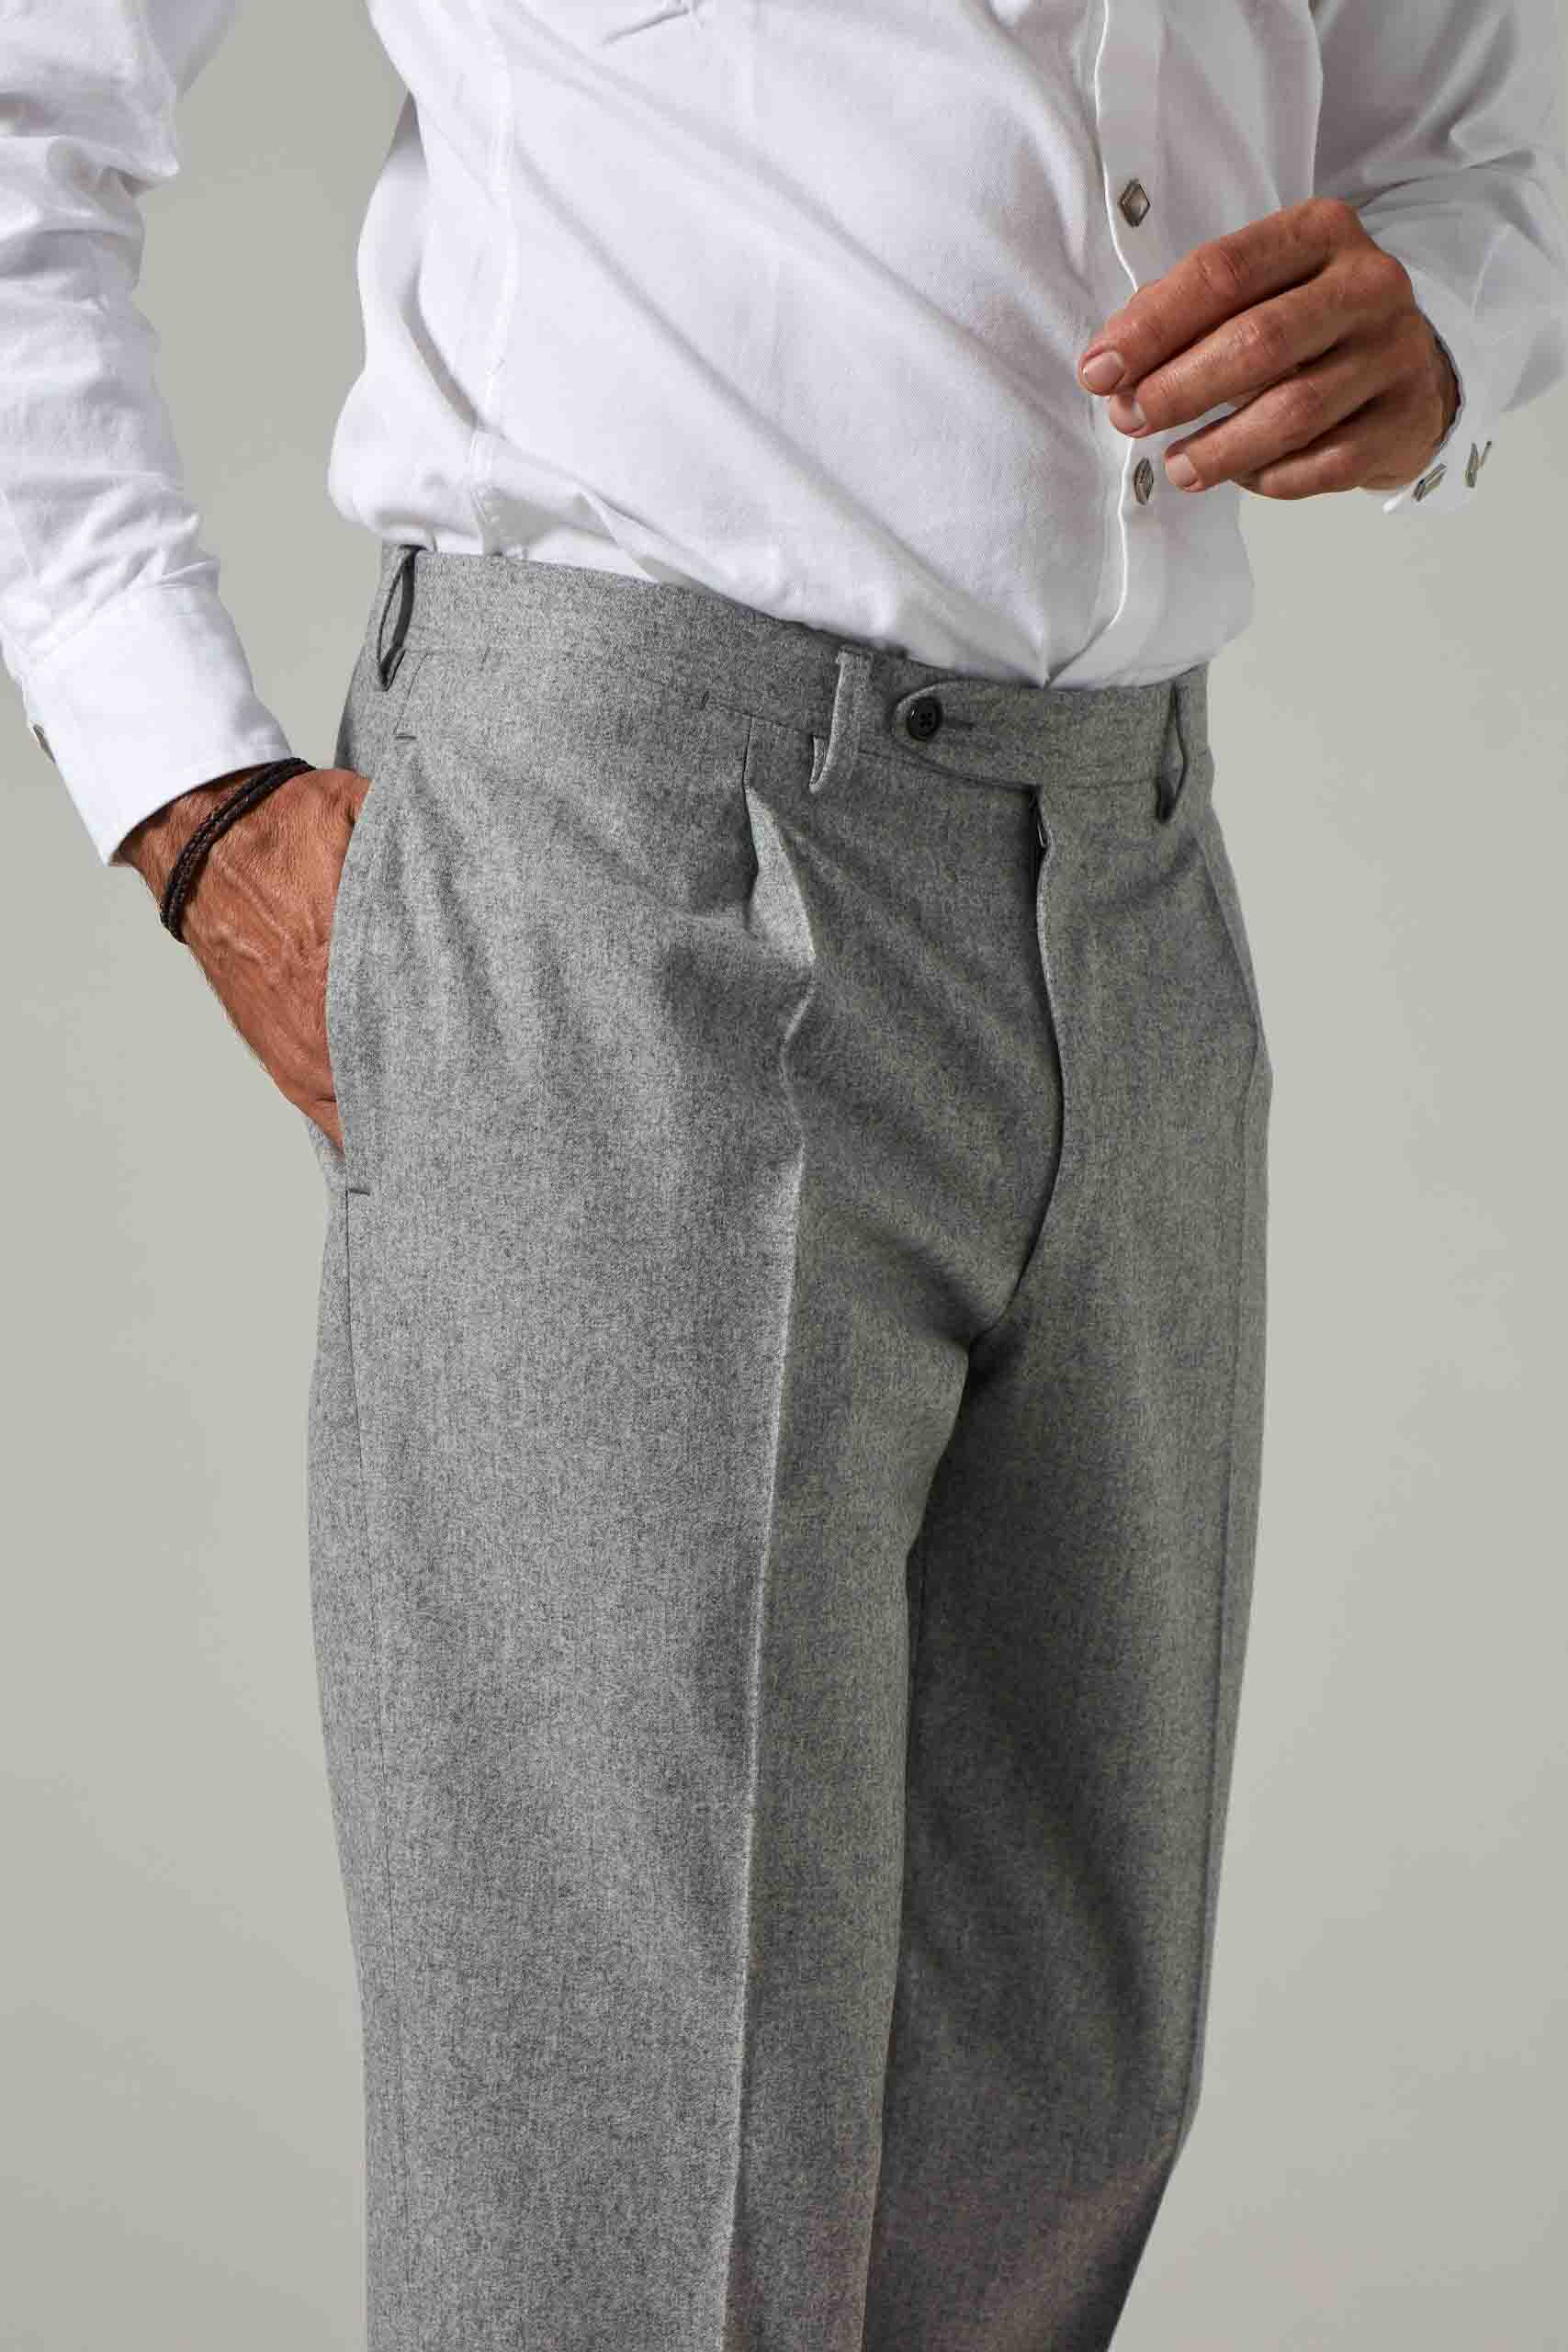 Kit Blake  All Our Grey Flannel Trousers